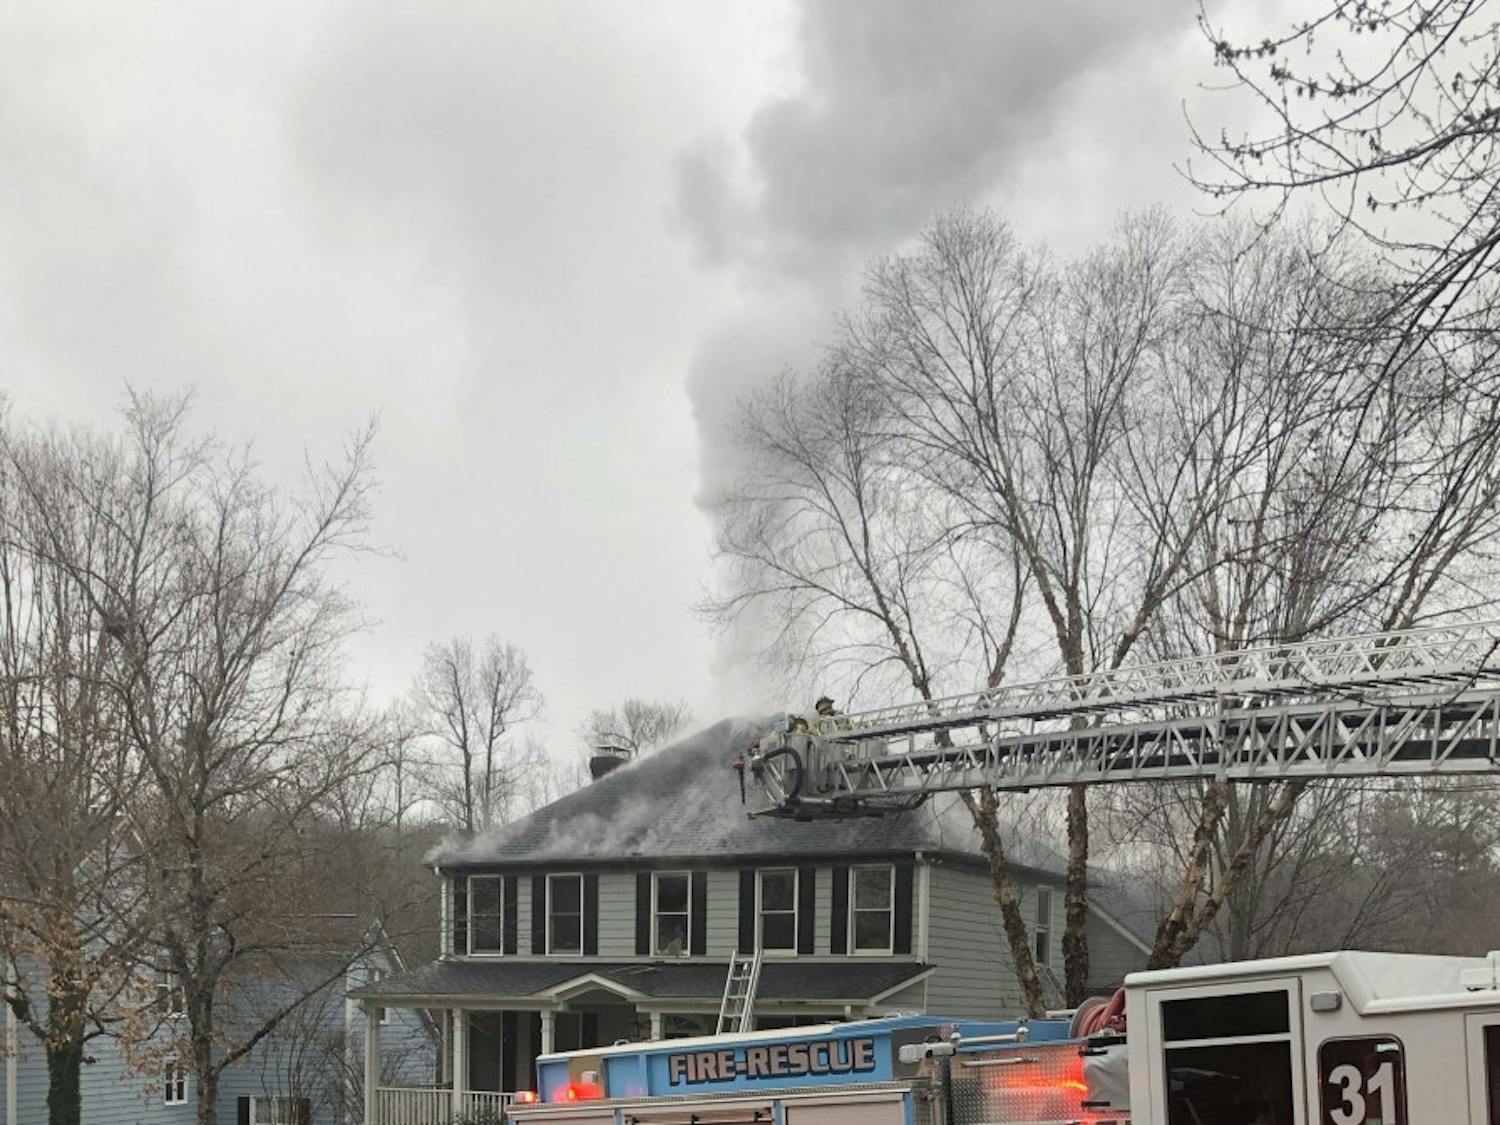 The Chapel Hill Fire Department responded to the report of a structure fire in the attic of 111 Parkside Circle in Southern Village at 3:04 p.m. Sunday, Feb. 17, 2019. 
Photo by @krgpryal via Twitter